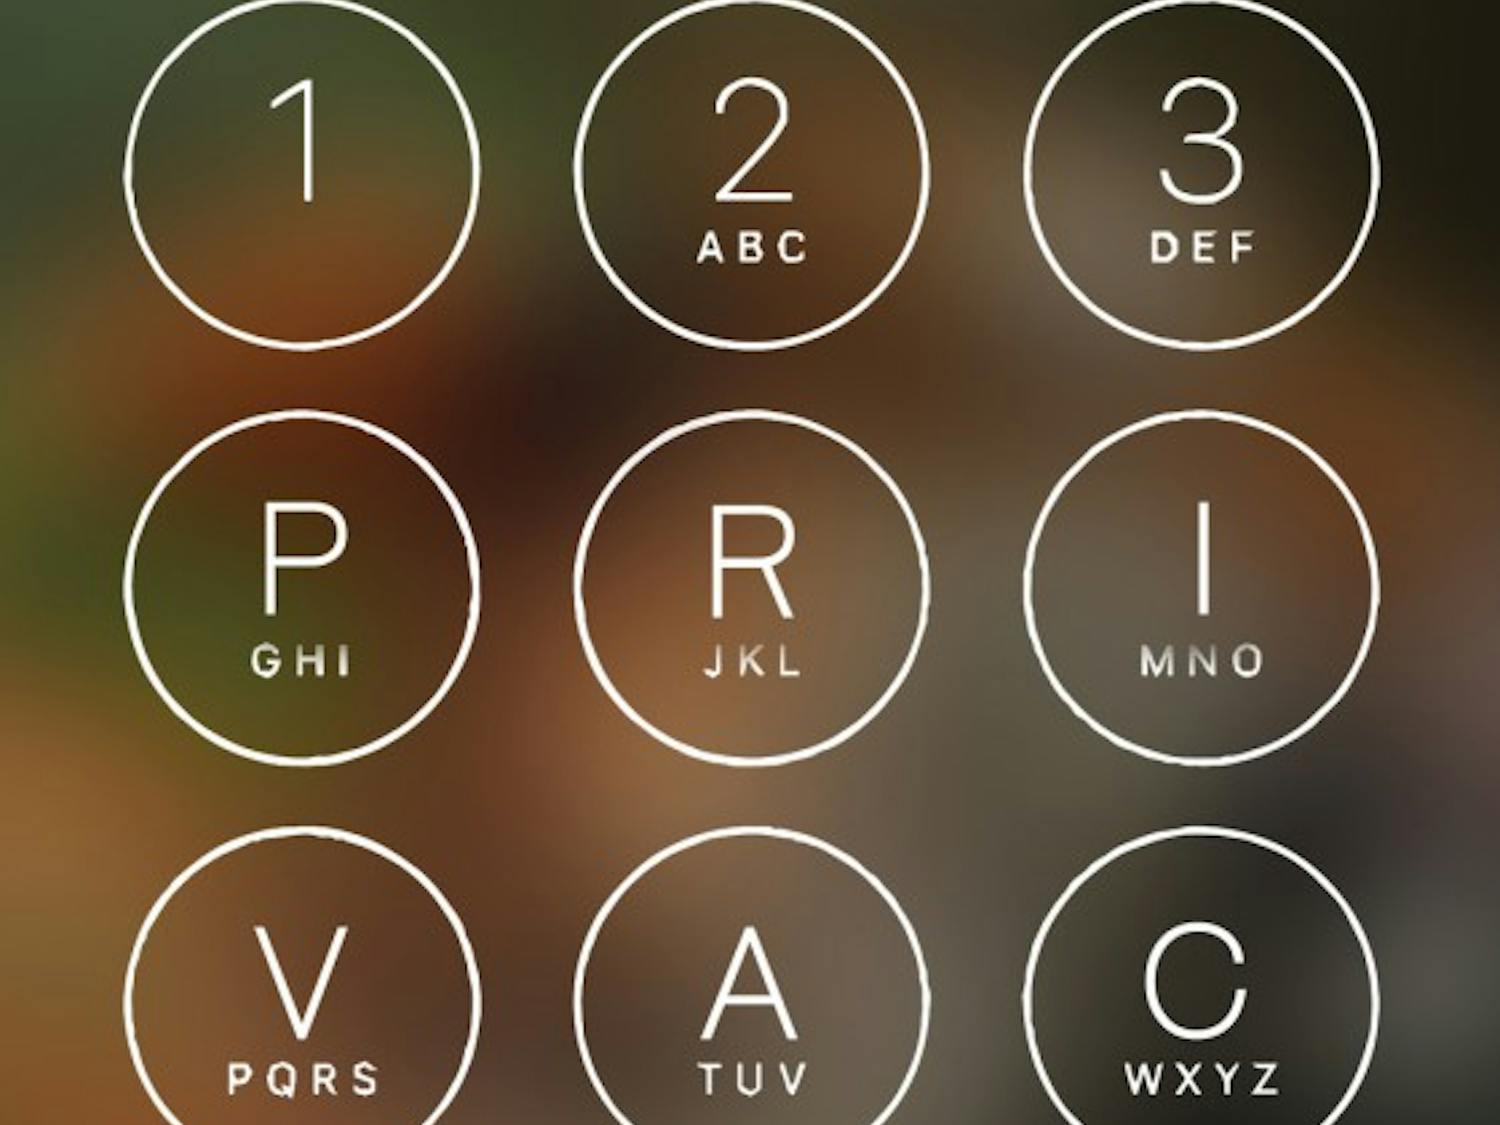 The court order for Apple to unlock a suspect's iPhone places all users' privacy at risk.